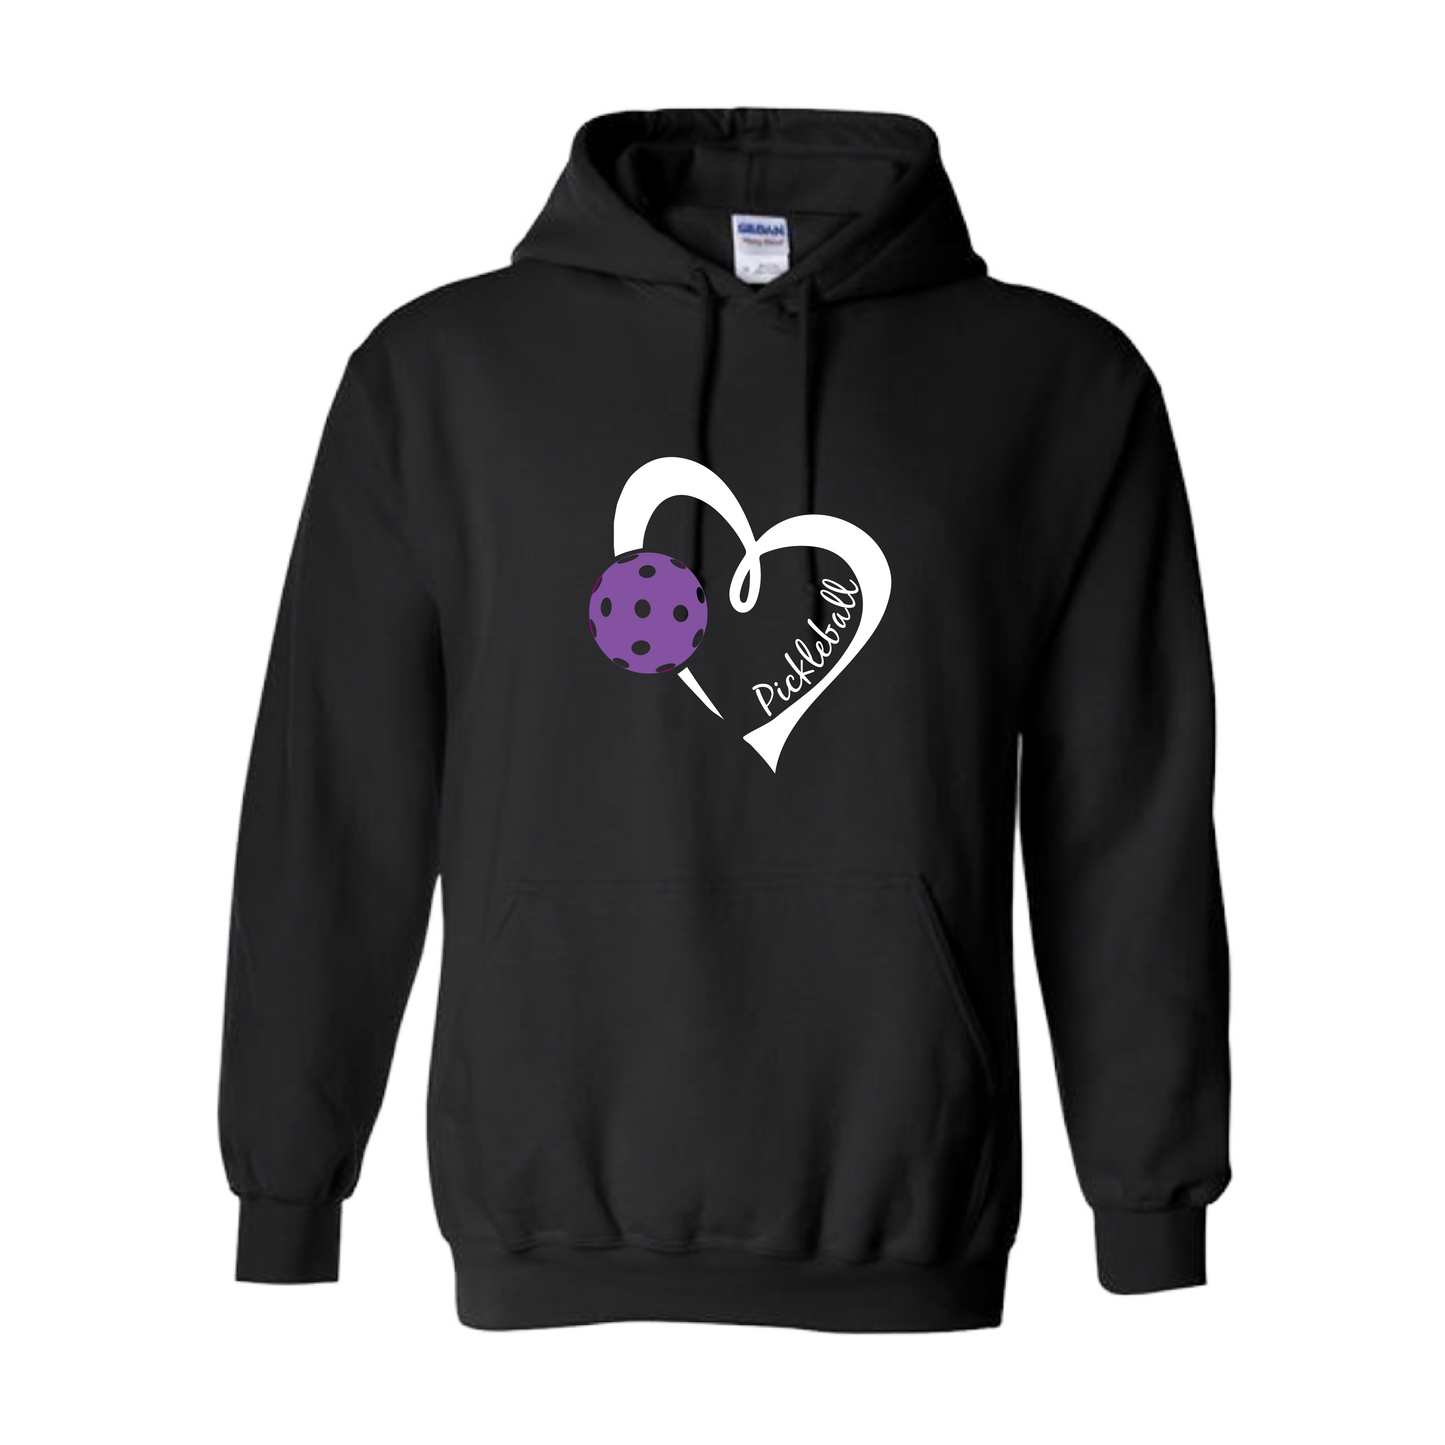 This unisex hoodie is designed to keep the wearer warm and comfortable on the Pickleball court. It features a double-lined hood, moisture-wicking material, and a front pouch pocket. With its unique design, it provides both fashion and function.